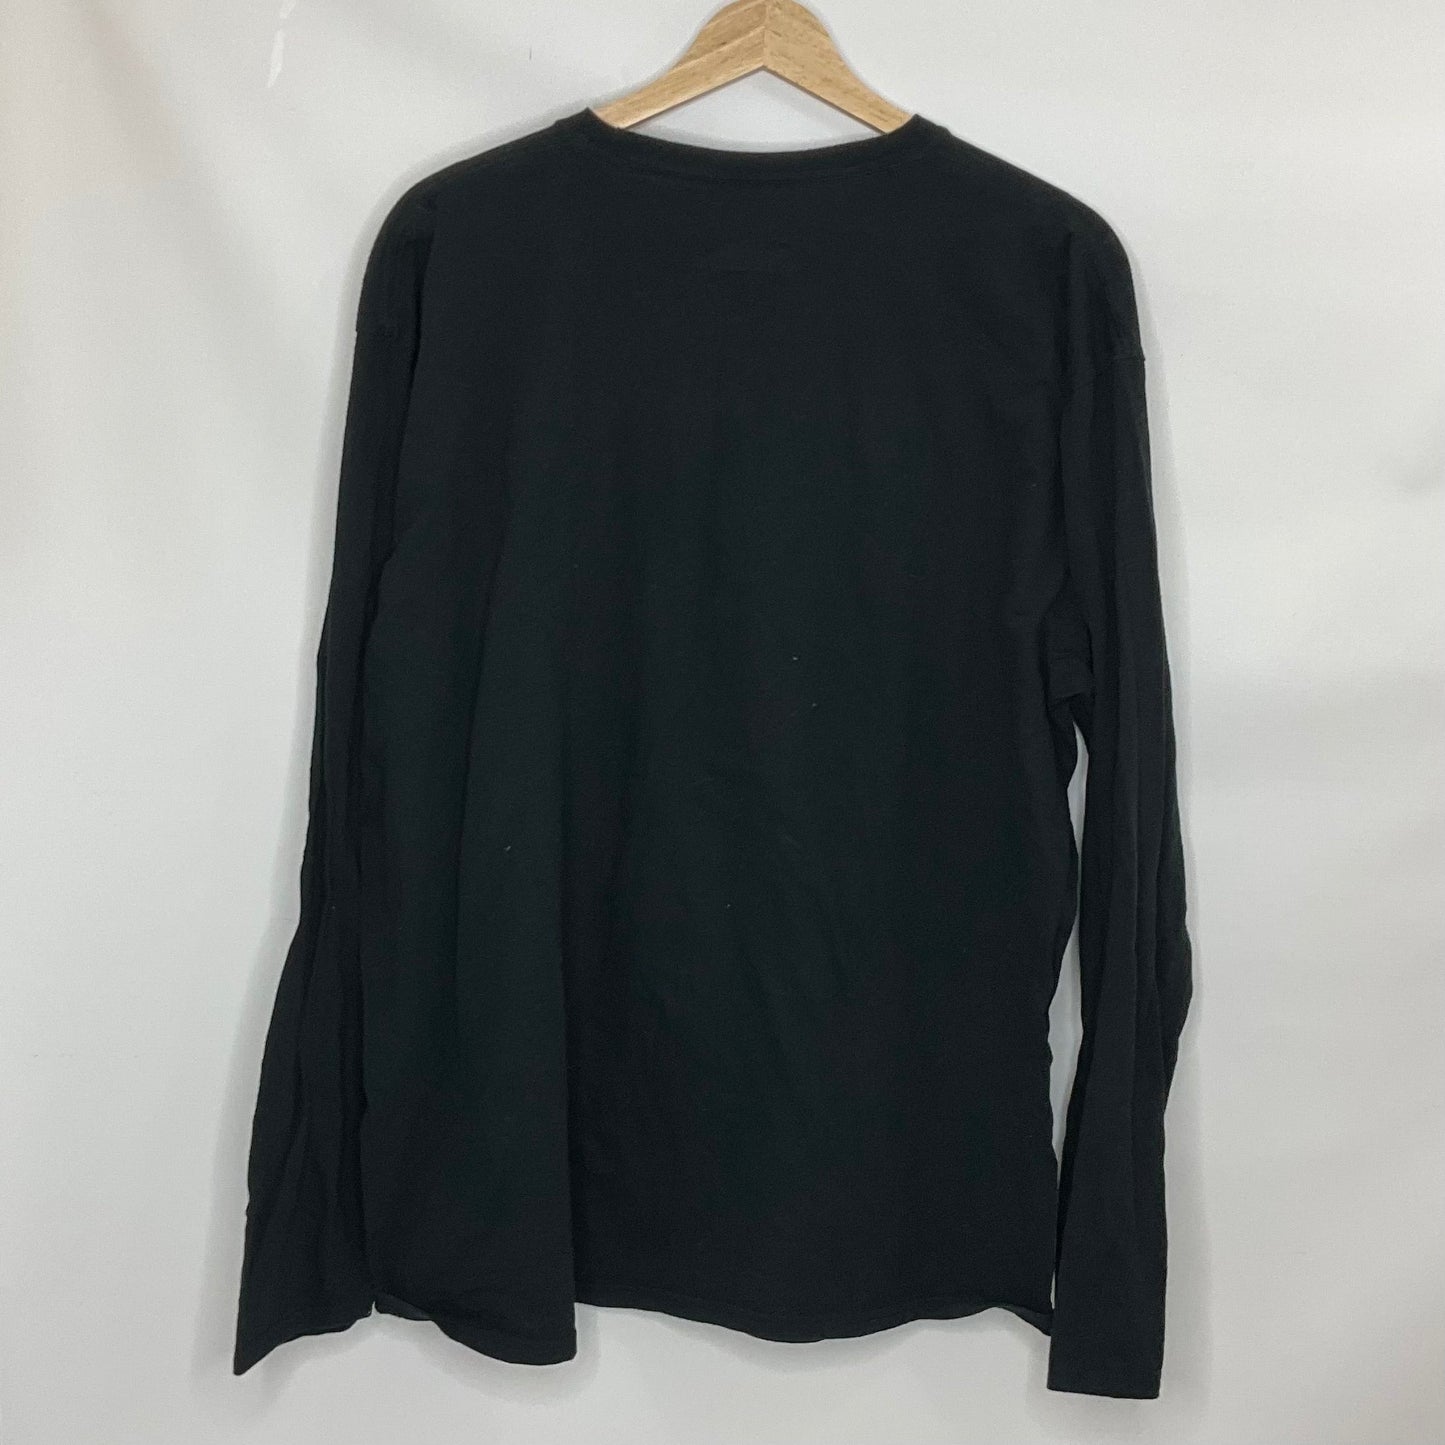 Black Athletic Top Long Sleeve Collar Clothes Mentor, Size 2x